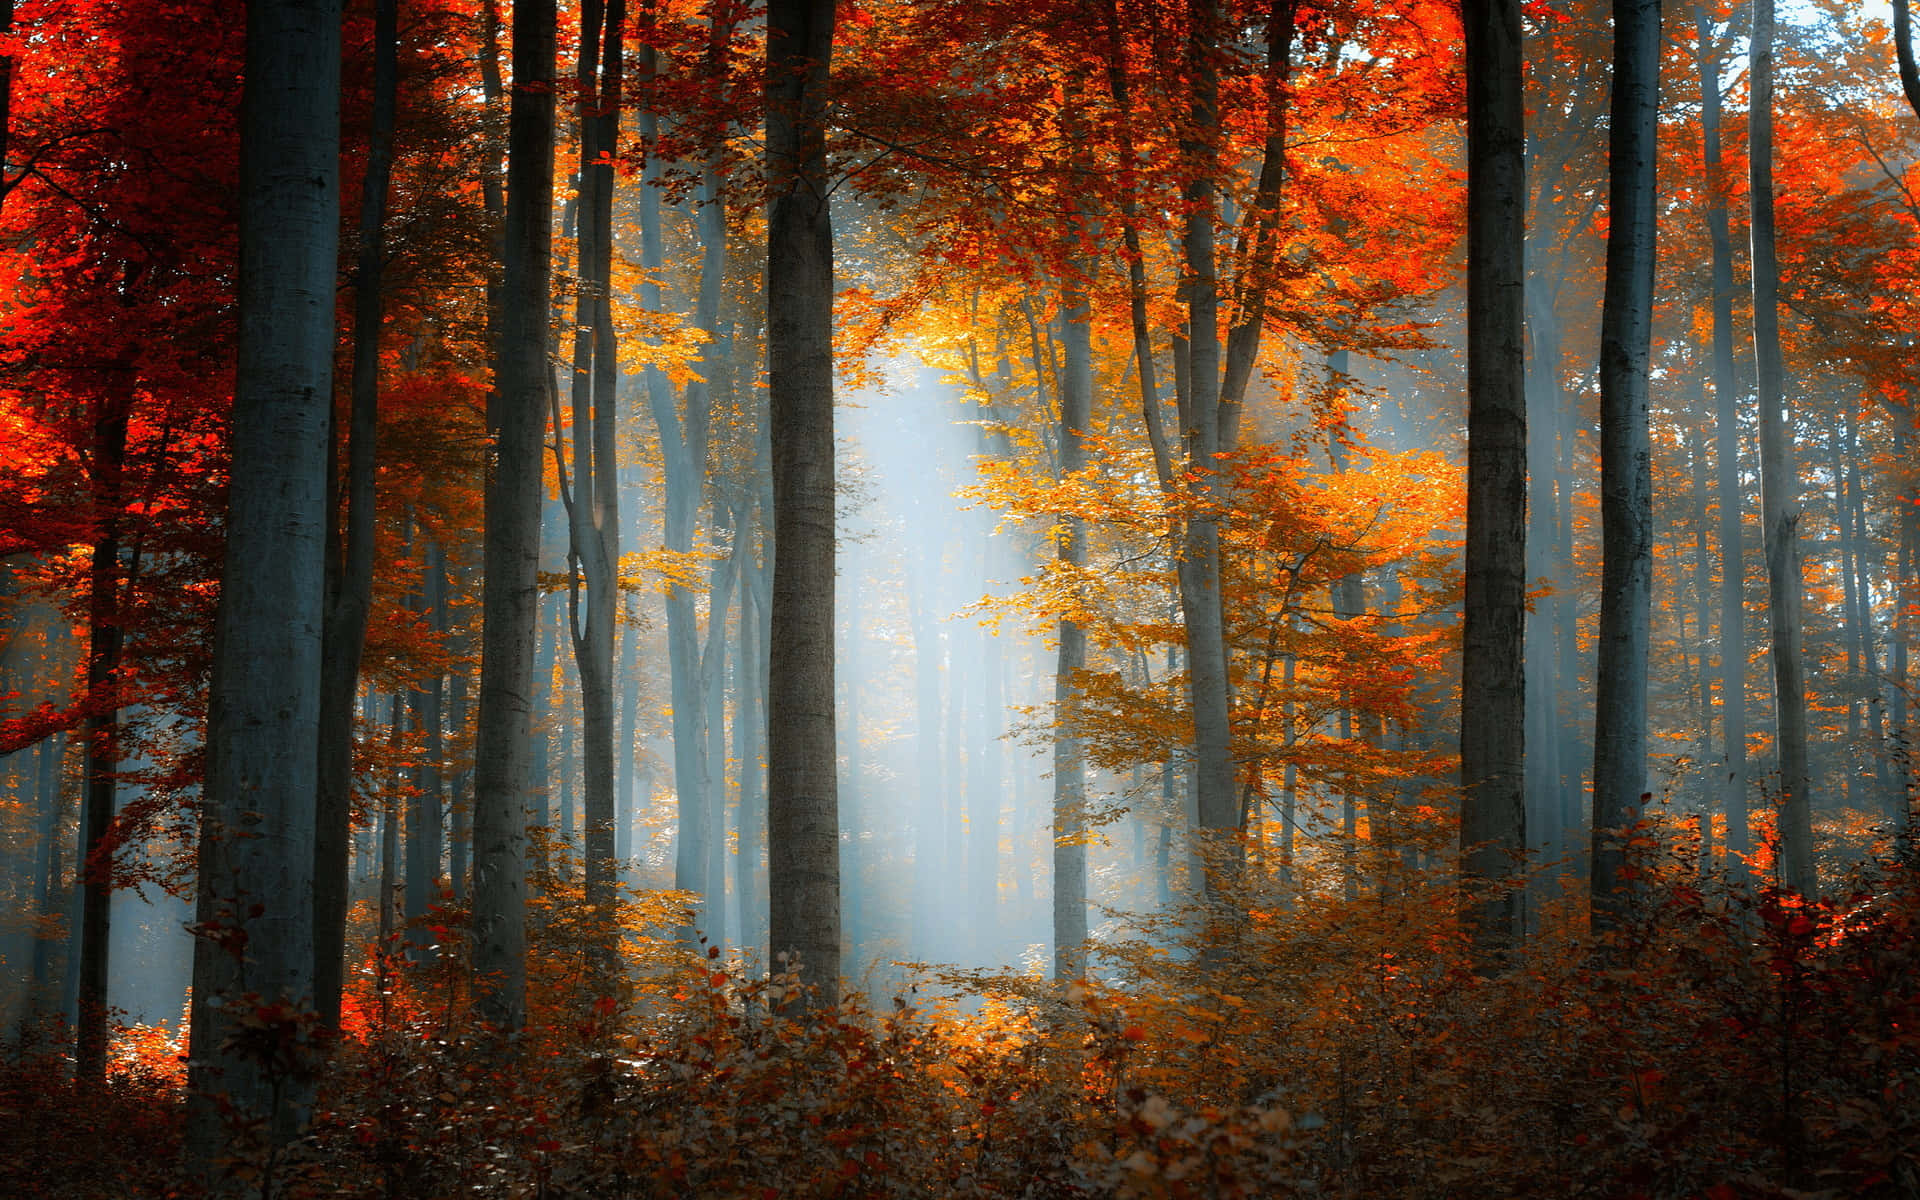 Enchanting Fall Forest - a symphony of colors Wallpaper